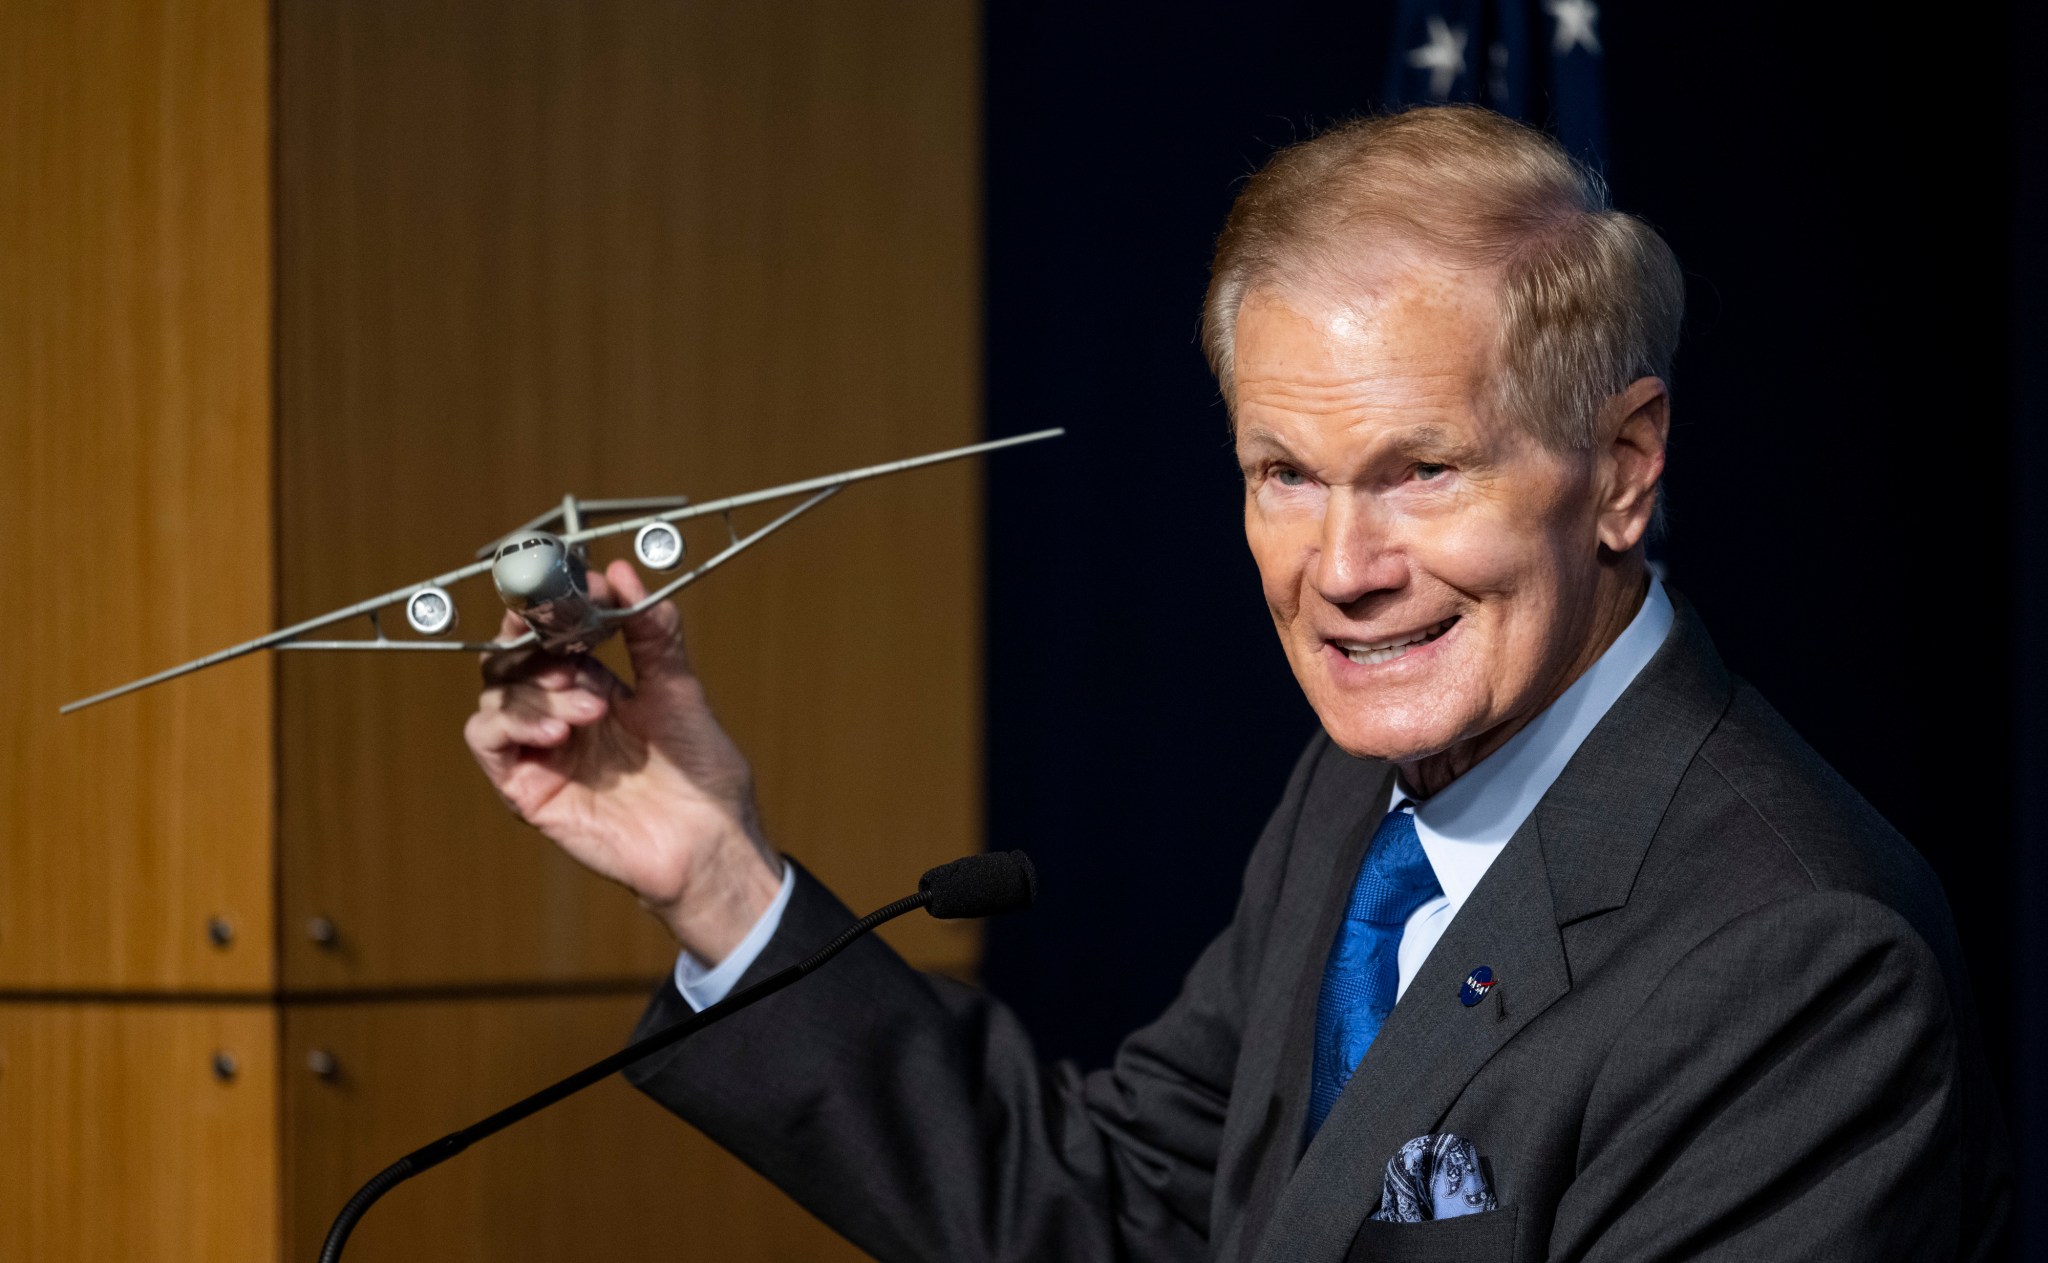 NASA Administrator Bill Nelson holds a model of an aircraft with a Transonic Truss-Braced Wing during a news conference on NASA’s Sustainable Flight Demonstrator project, Wednesday, Jan. 18, 2023, at the NASA Headquarters building in Washington, DC.